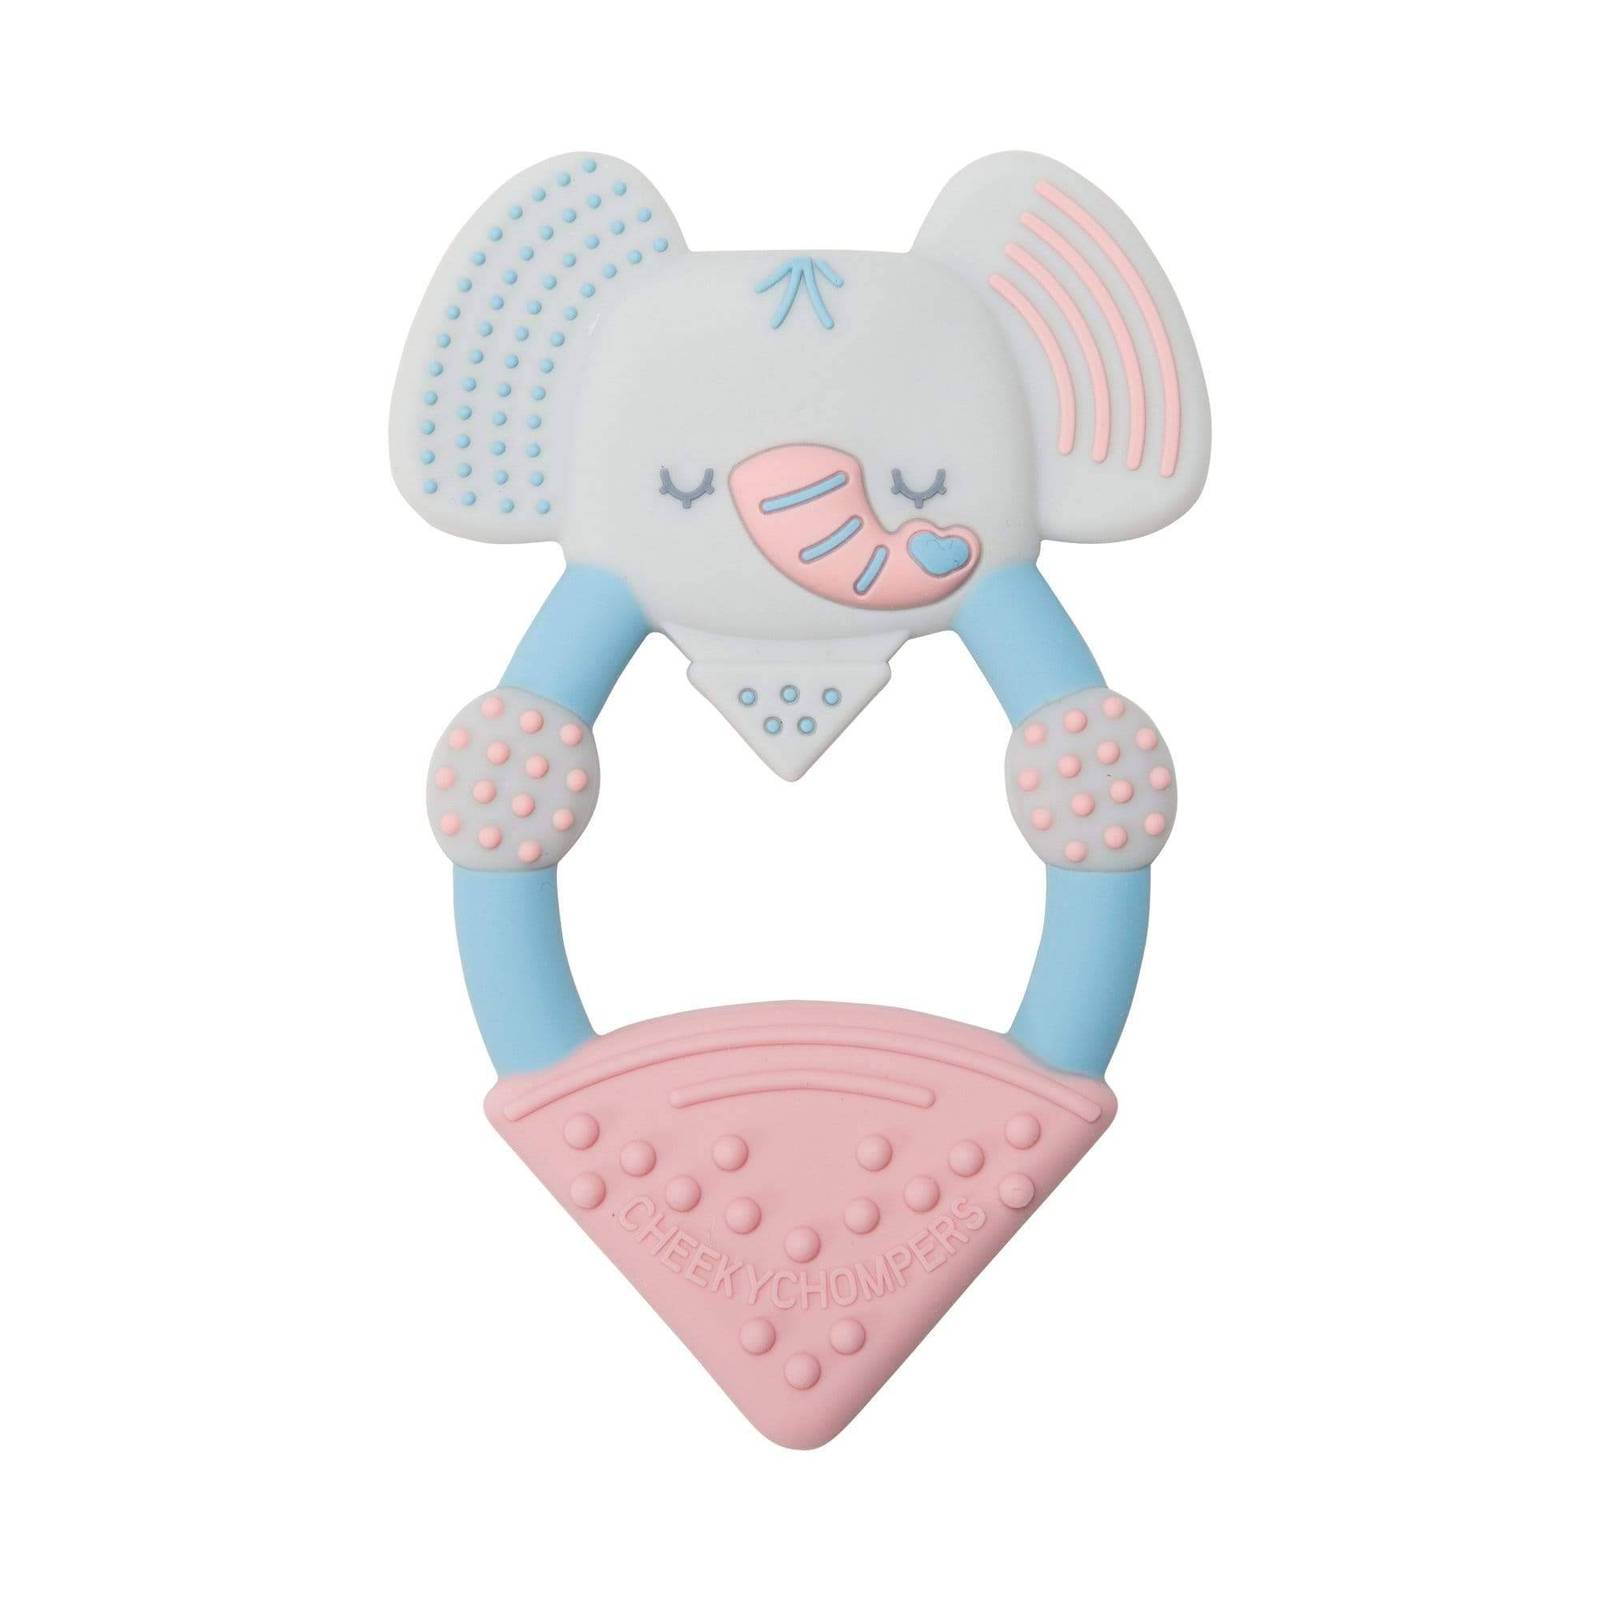 Baby teether in pink, grey and blue elephant design.